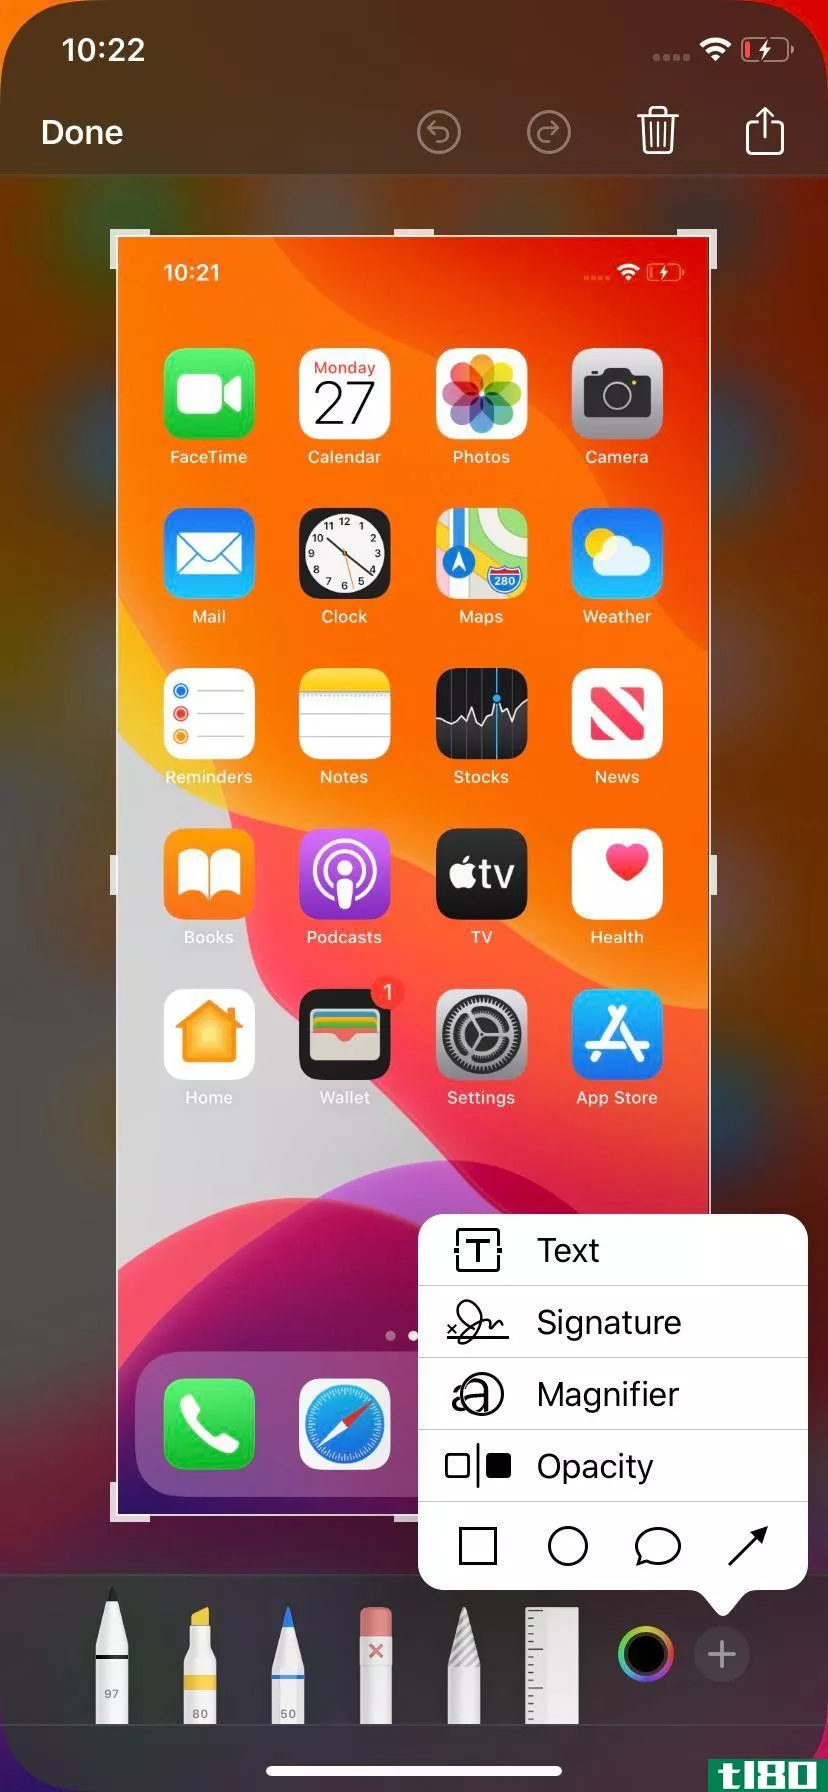 After taking a screenshot on your iPhone, you can edit it.